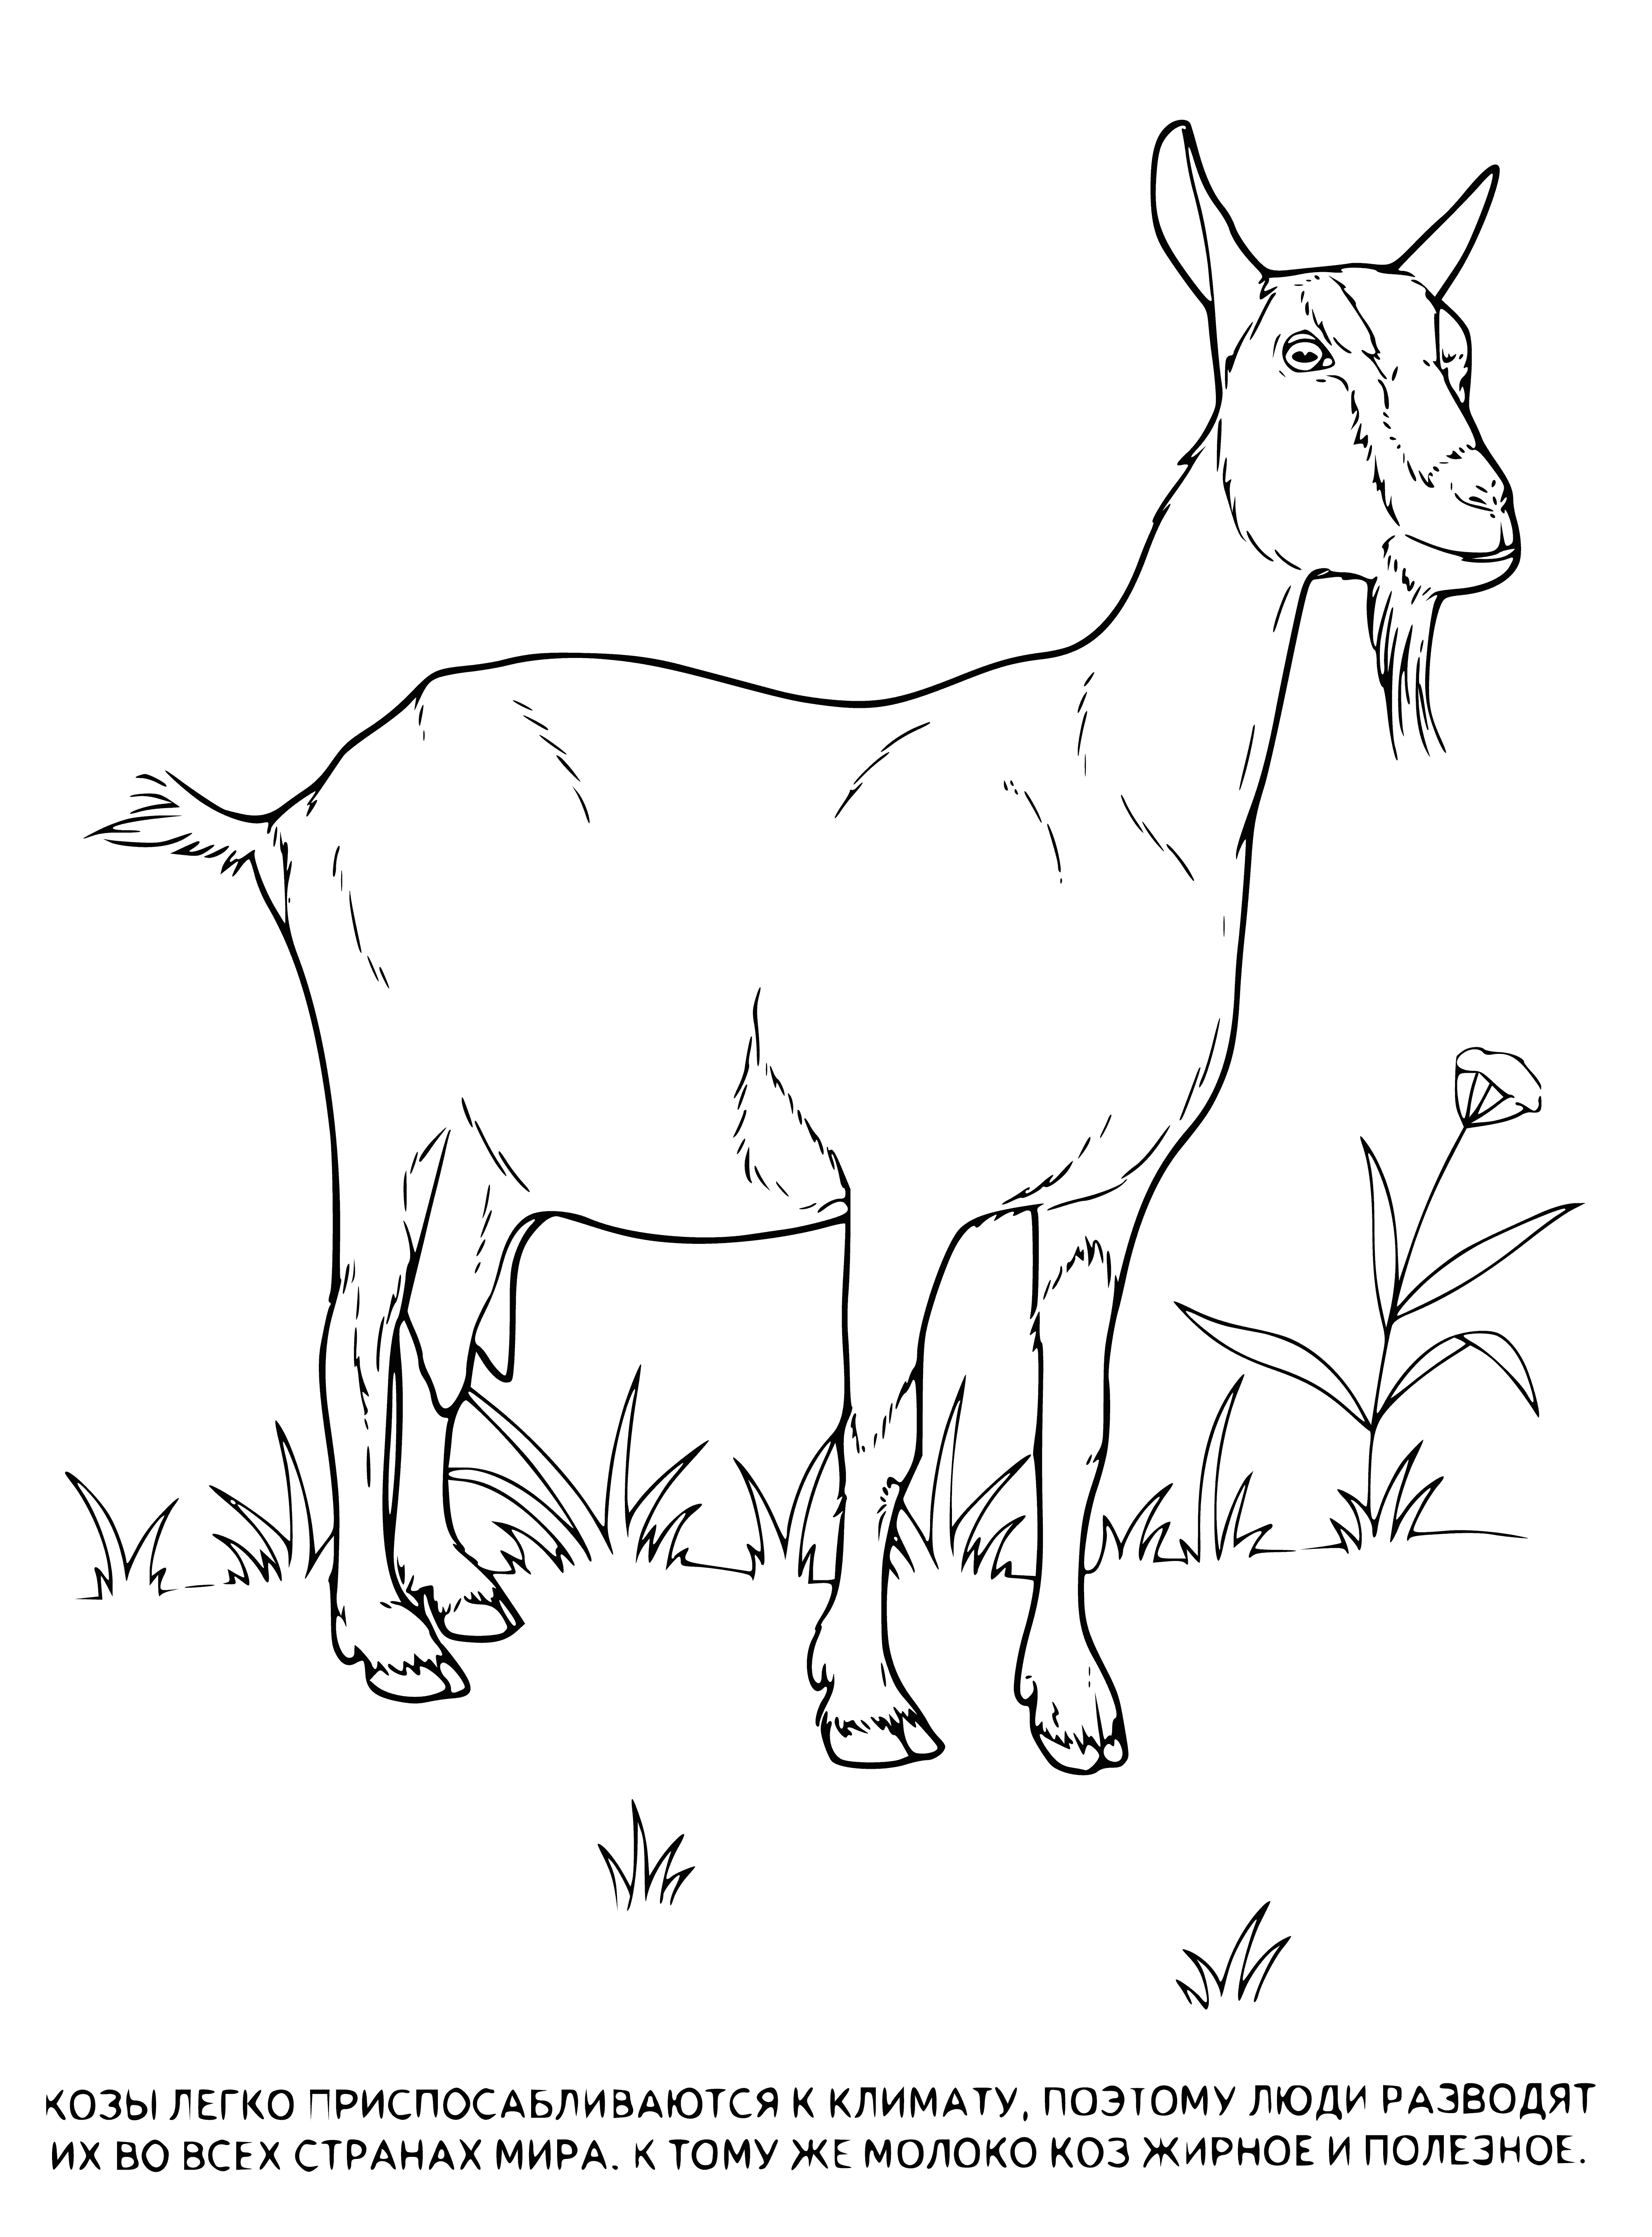 Goat coloring page